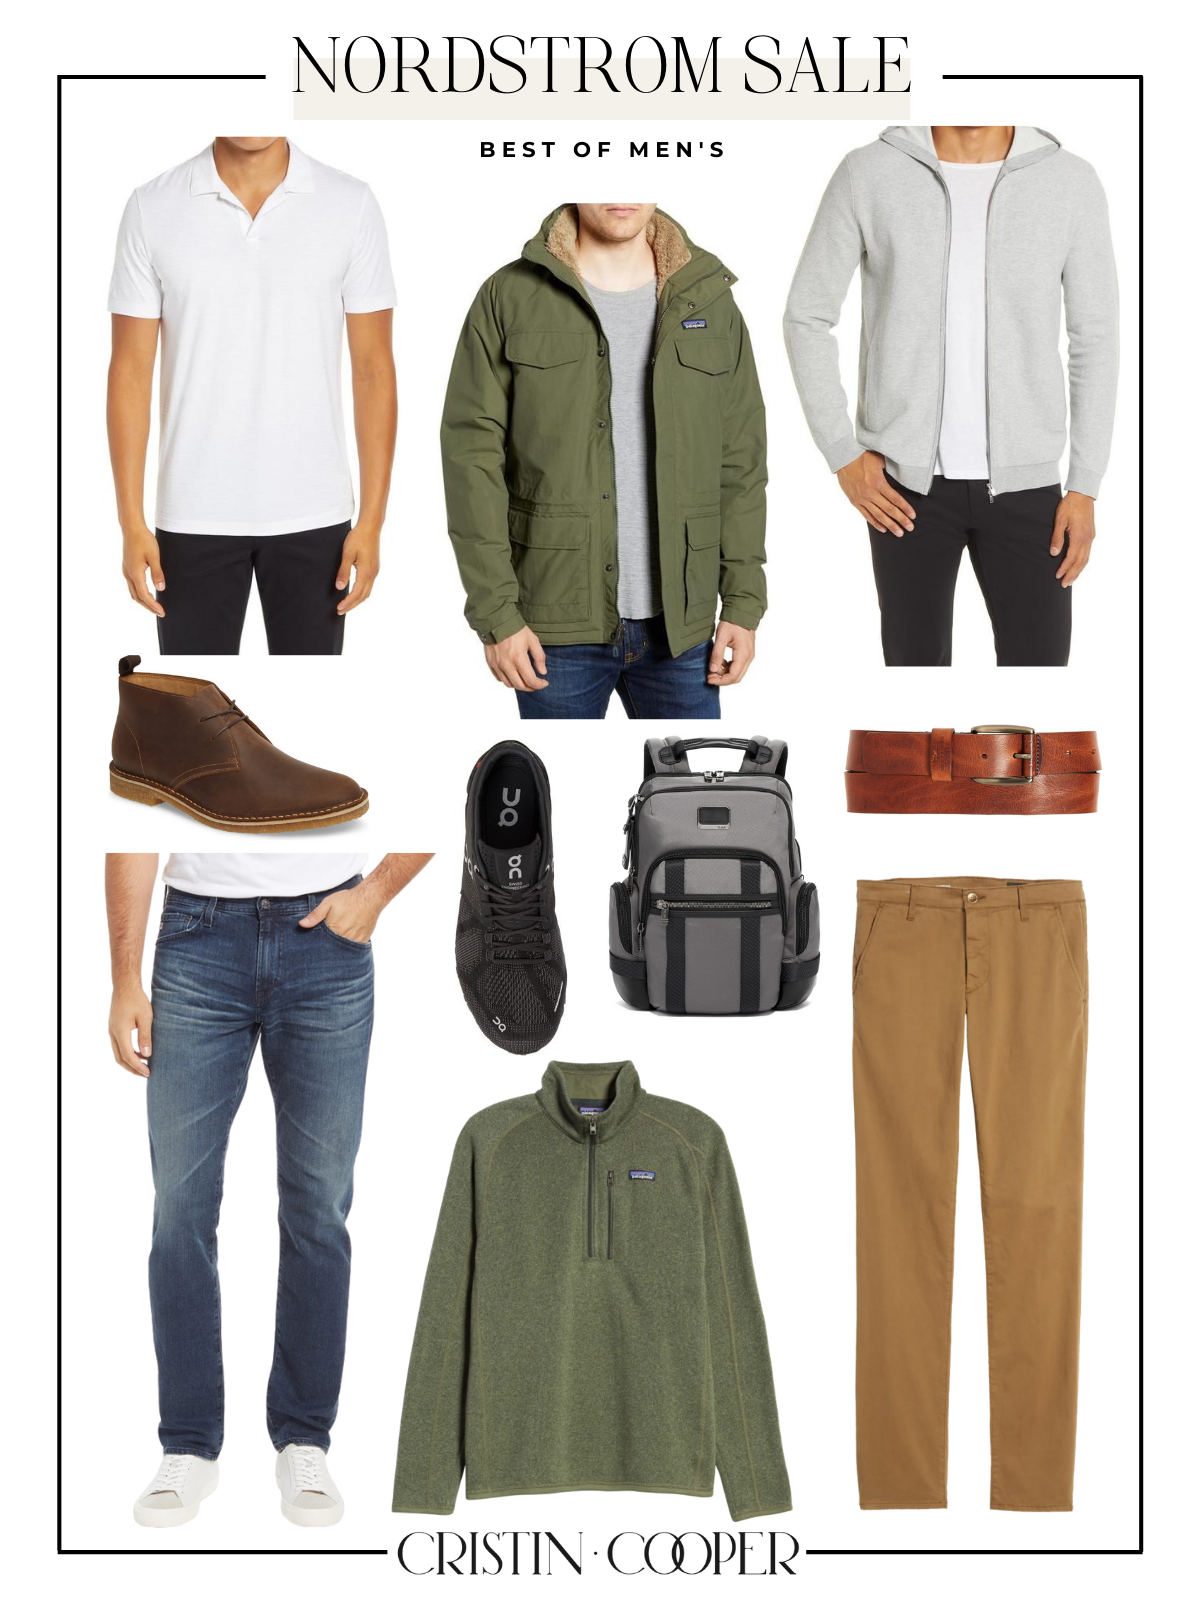 Men's Clothing, Shoes and Accessories from the Anniversary Sale